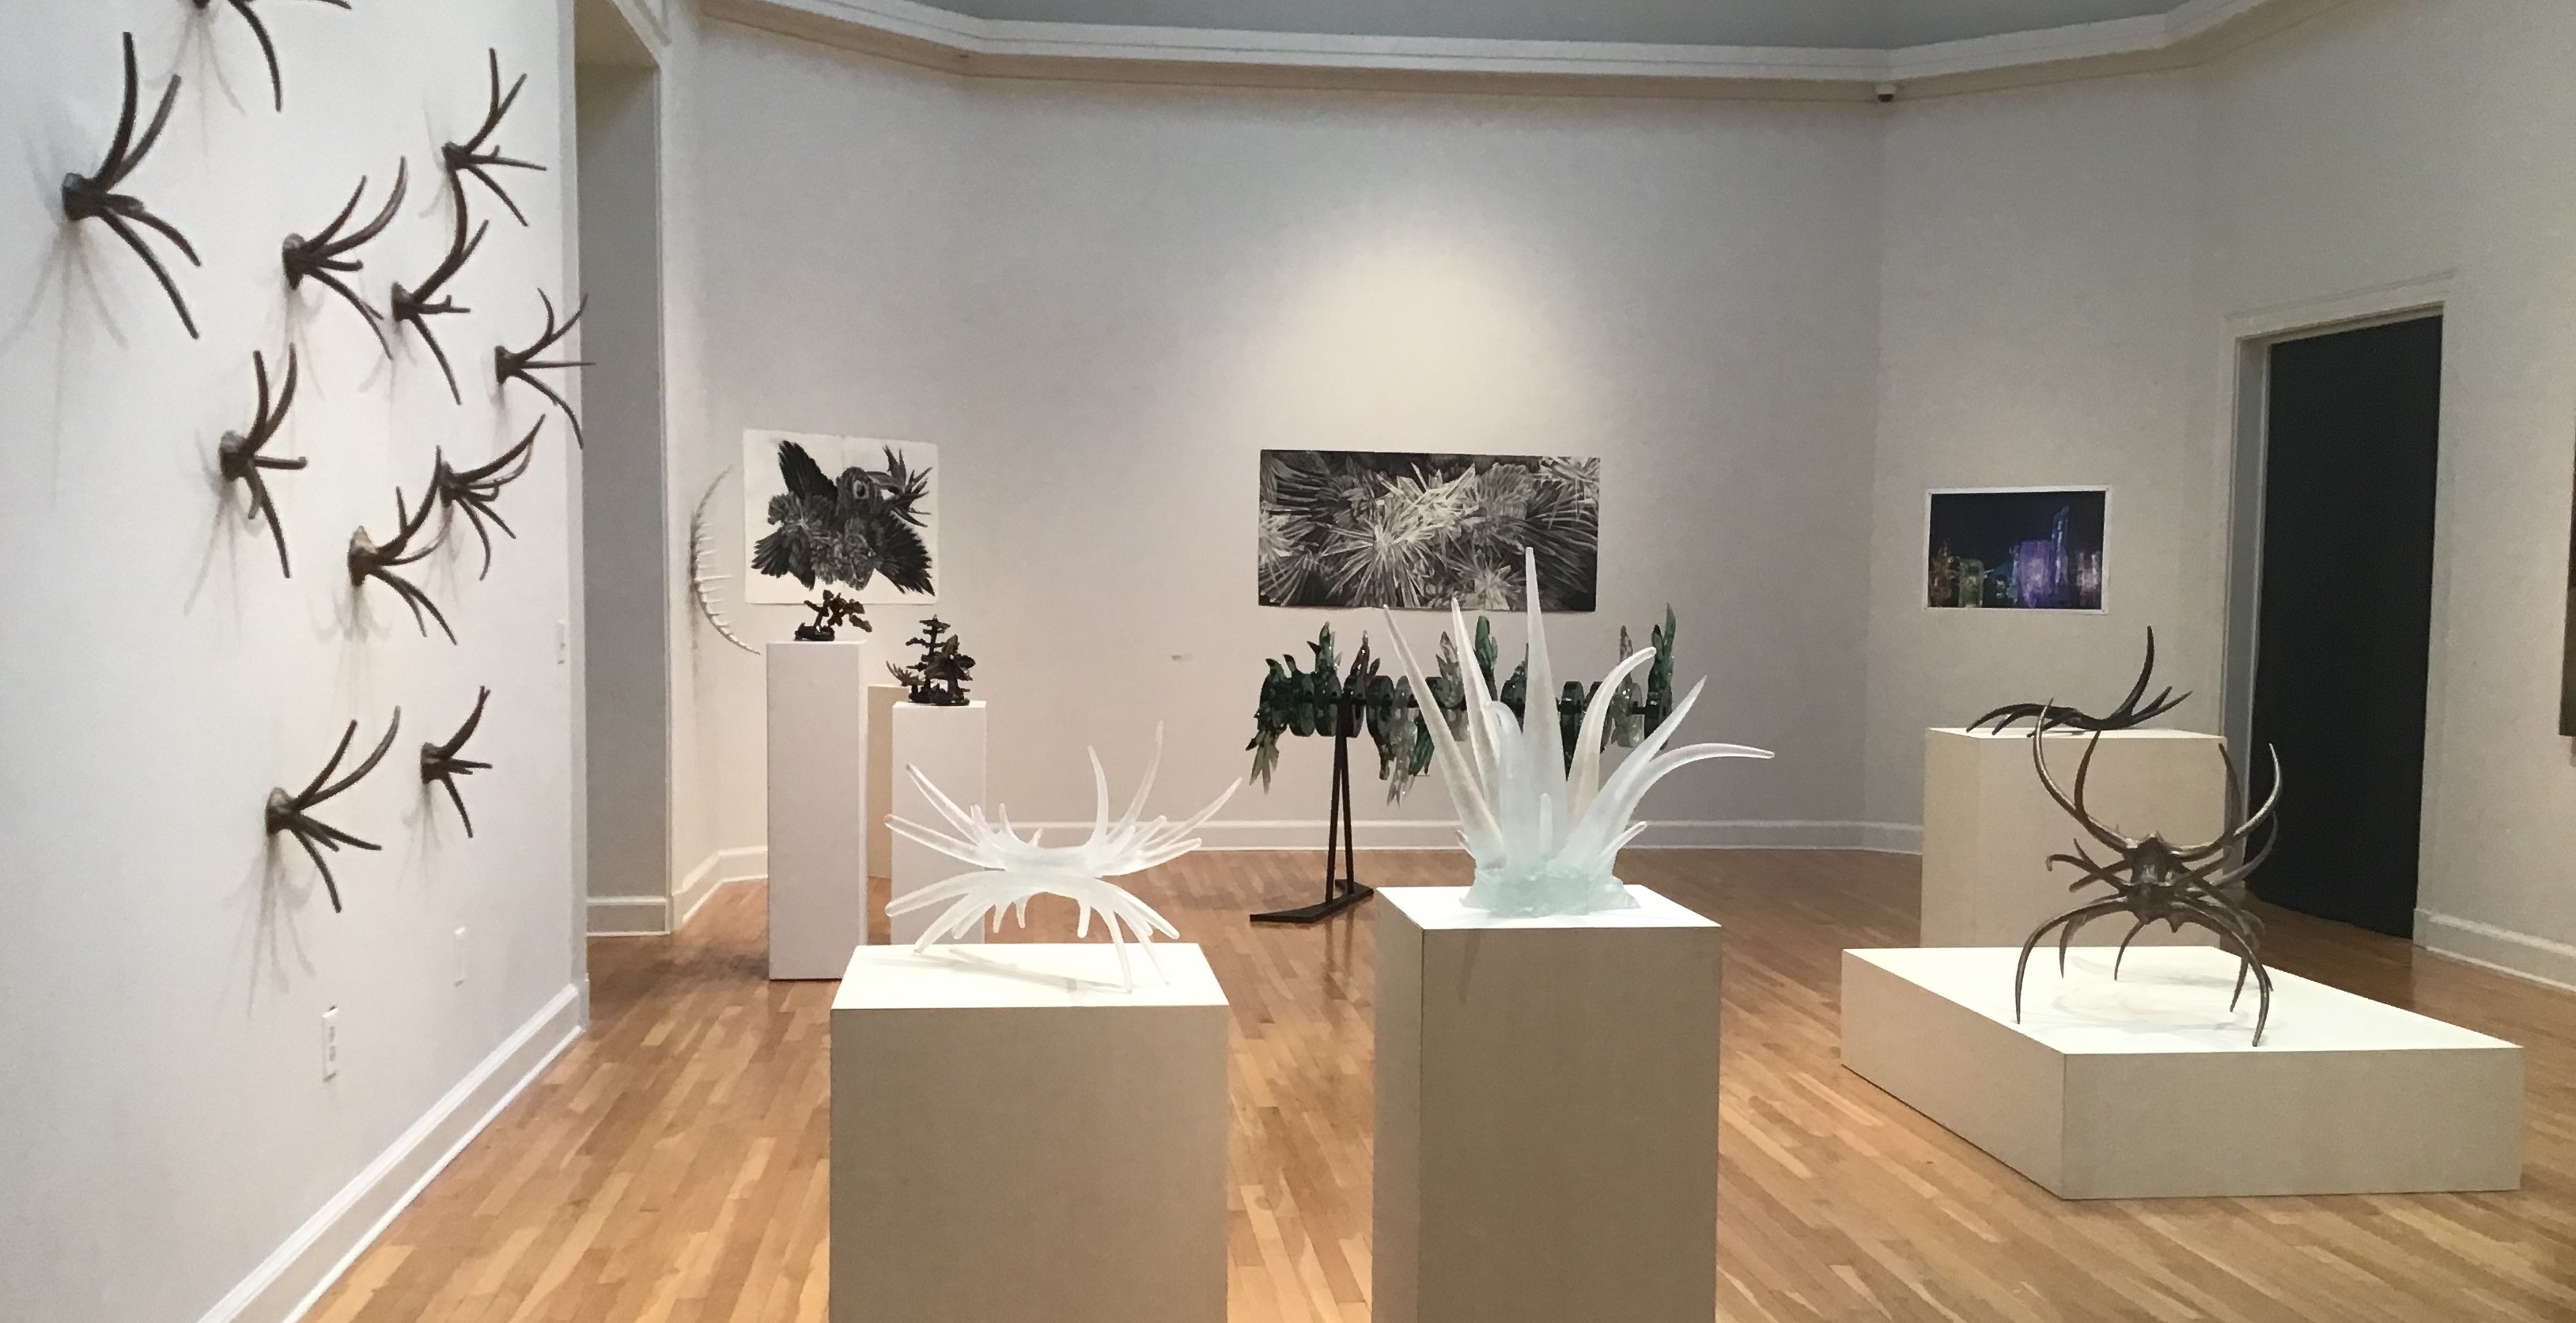 exhibition of sculpture and drawings by BFA students